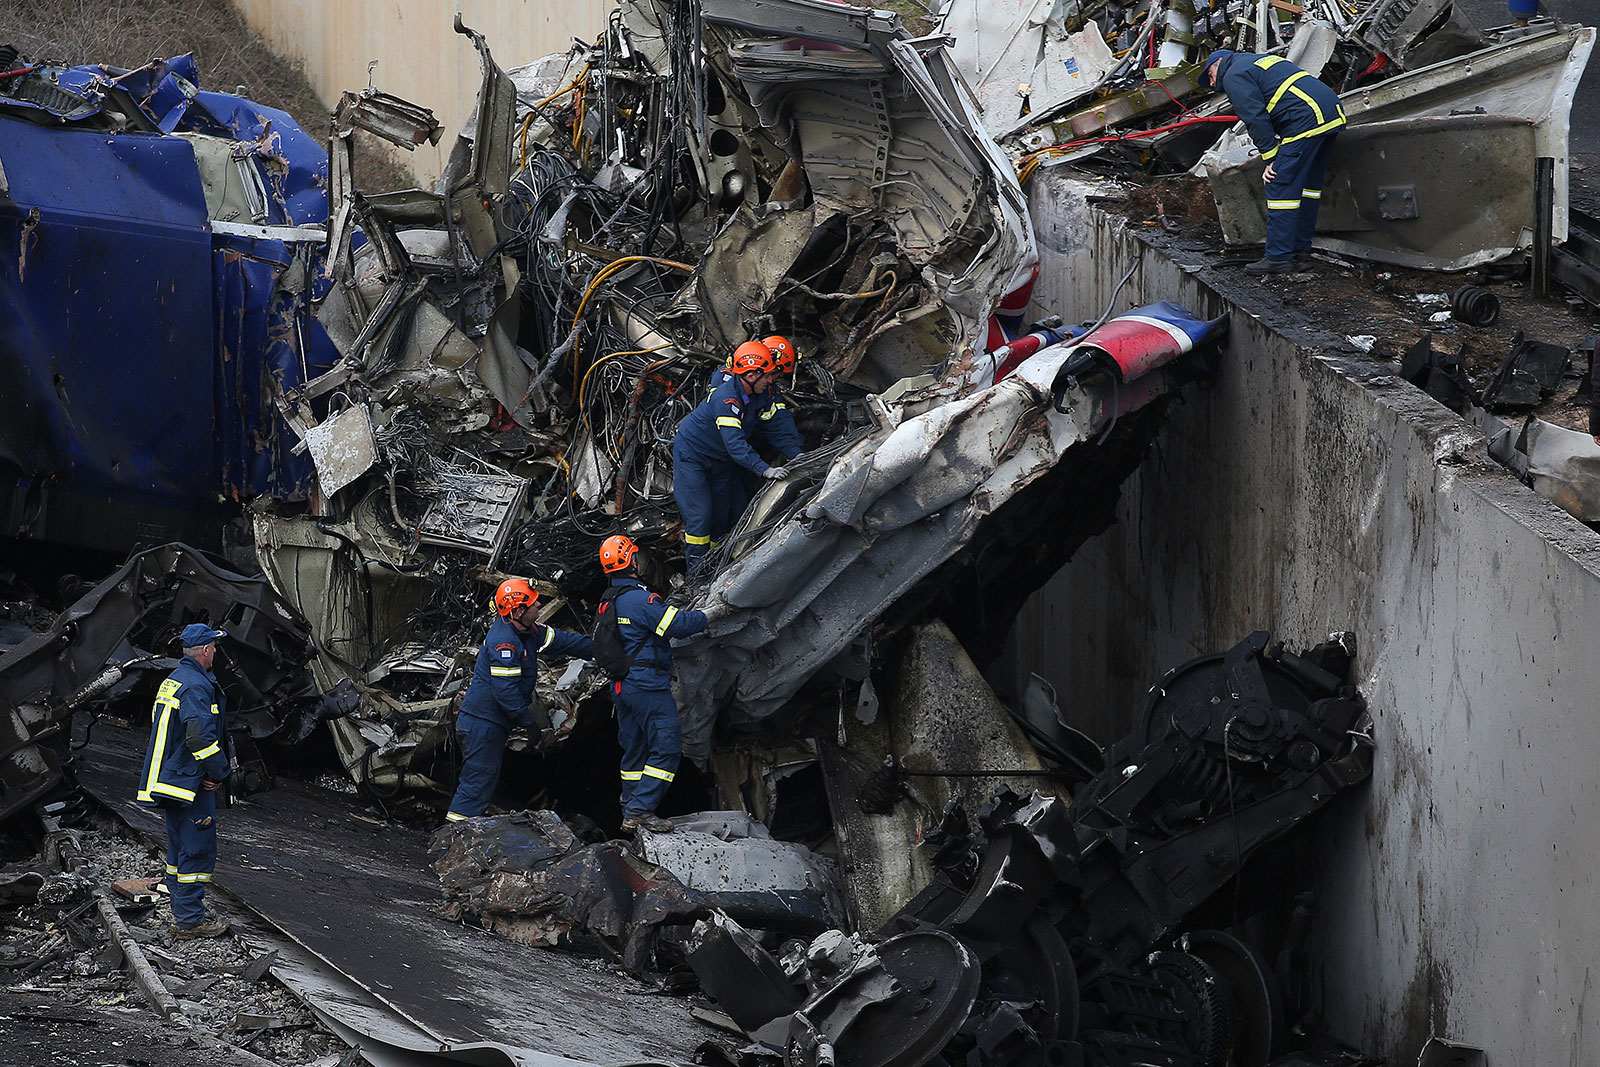 Rescuers operate next to debris of a train after a crash near the city of Larissa, Greece, on March 1.